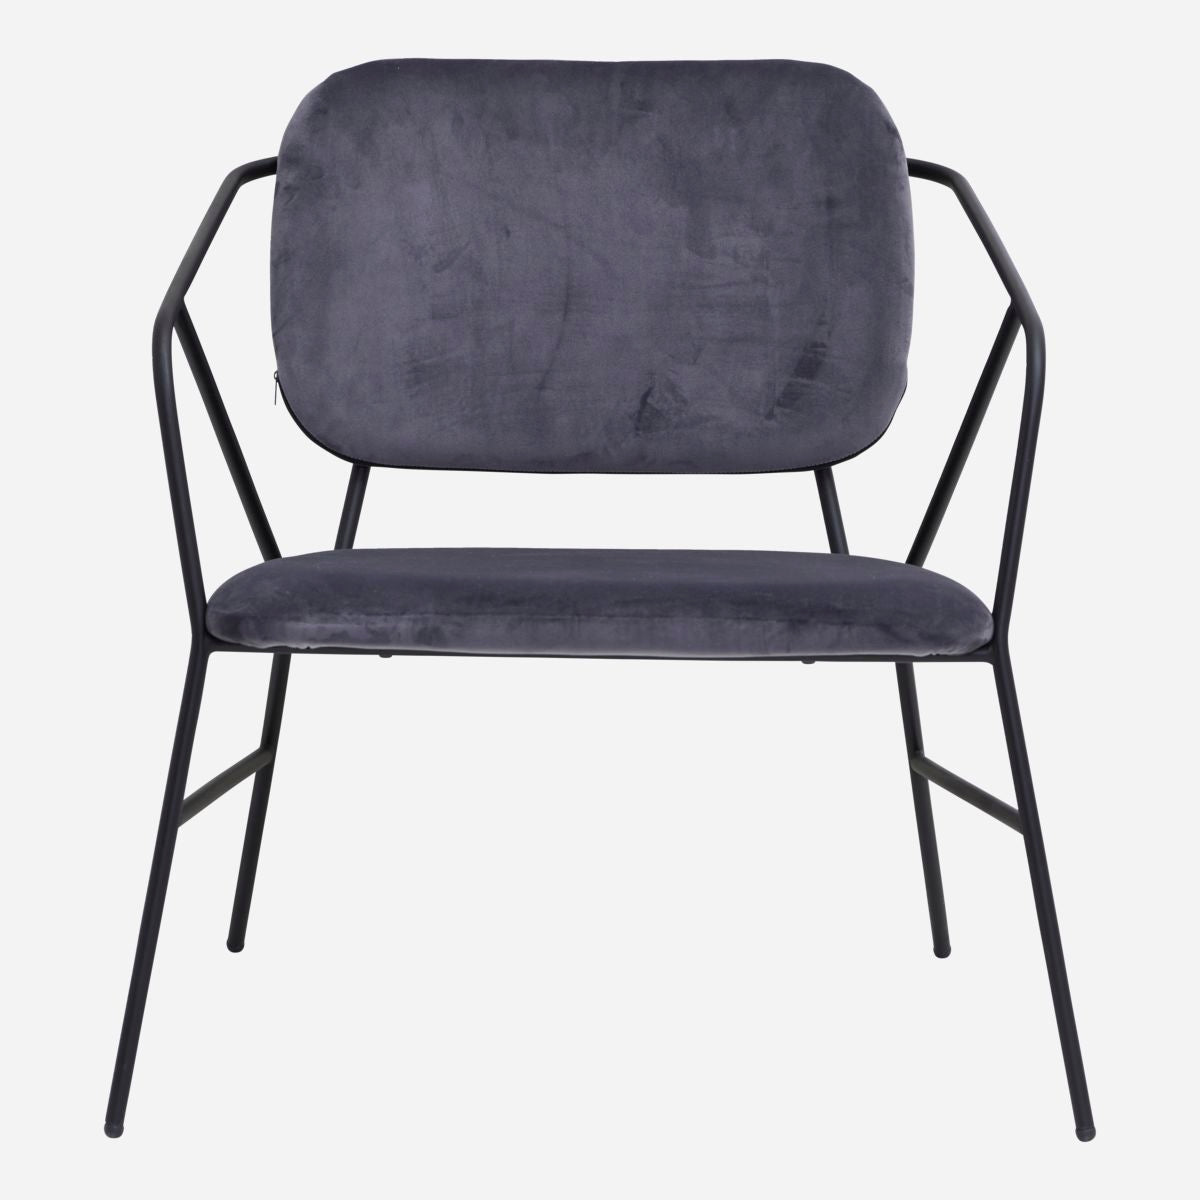 Lounge chair, Klever, Grey House Doctor